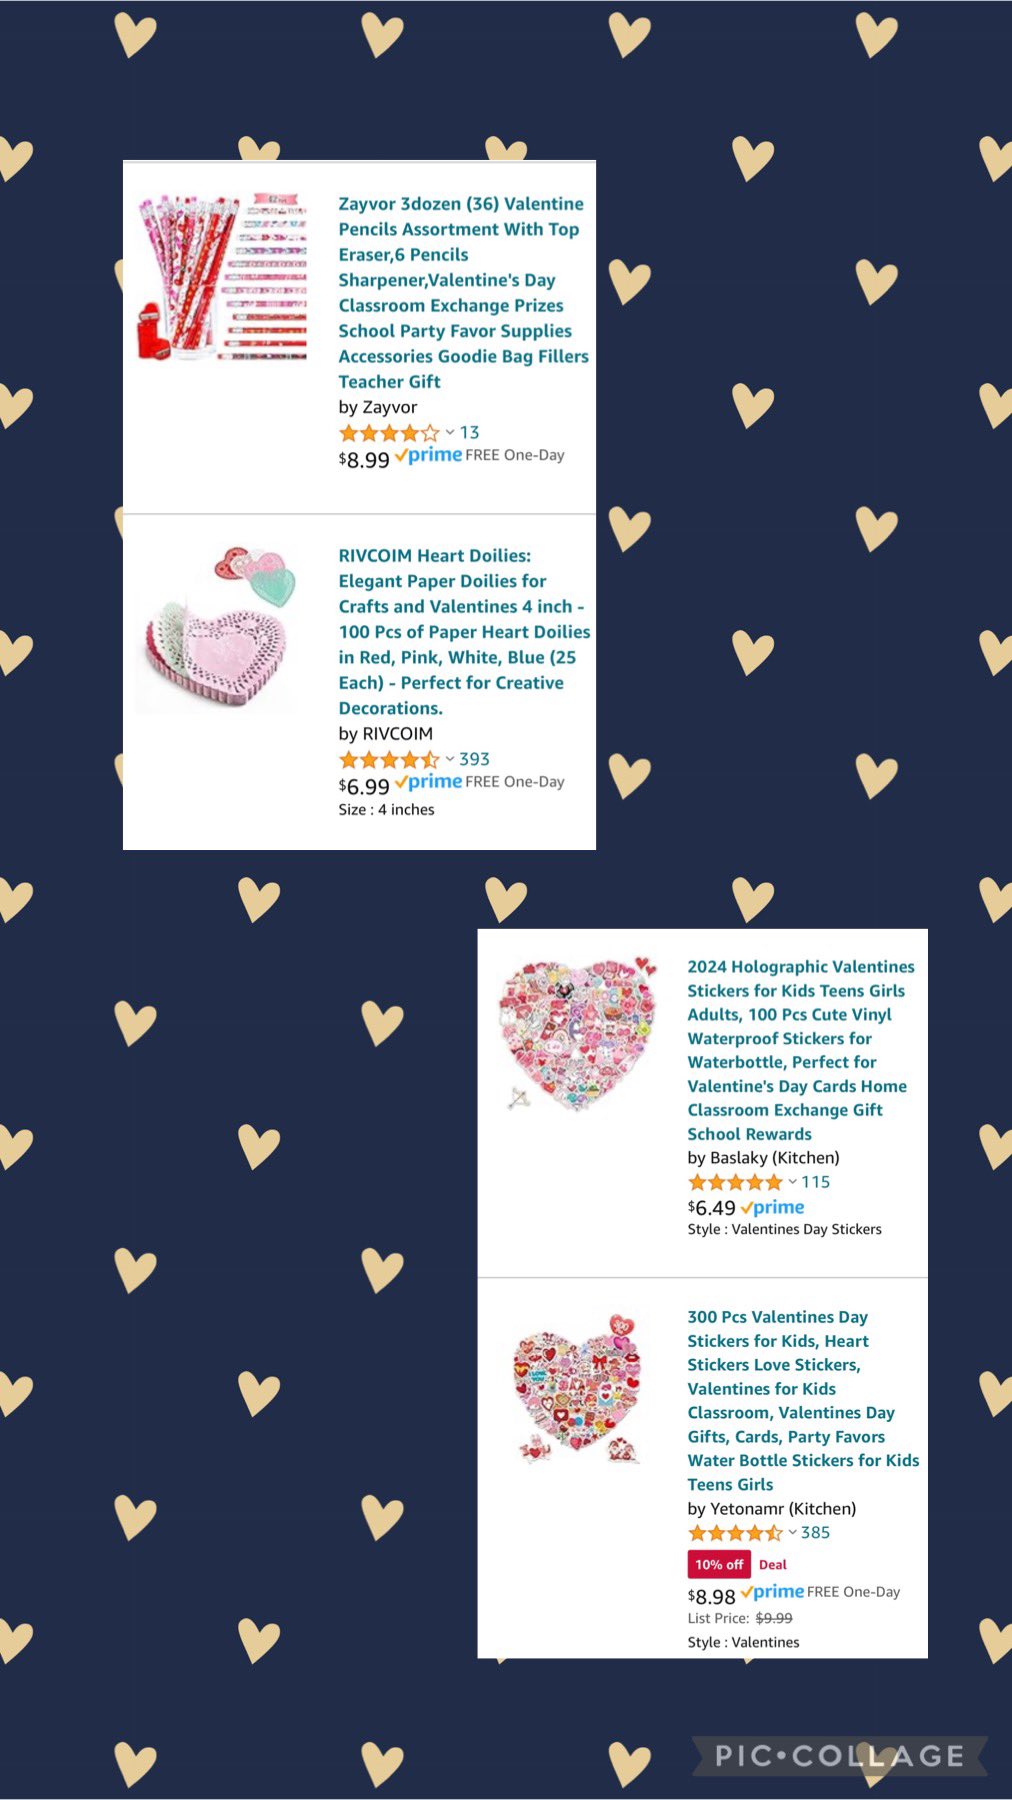 RIVCOIM Paper Hearts for Crafts 4 inch 100 pcs, Heart Paper